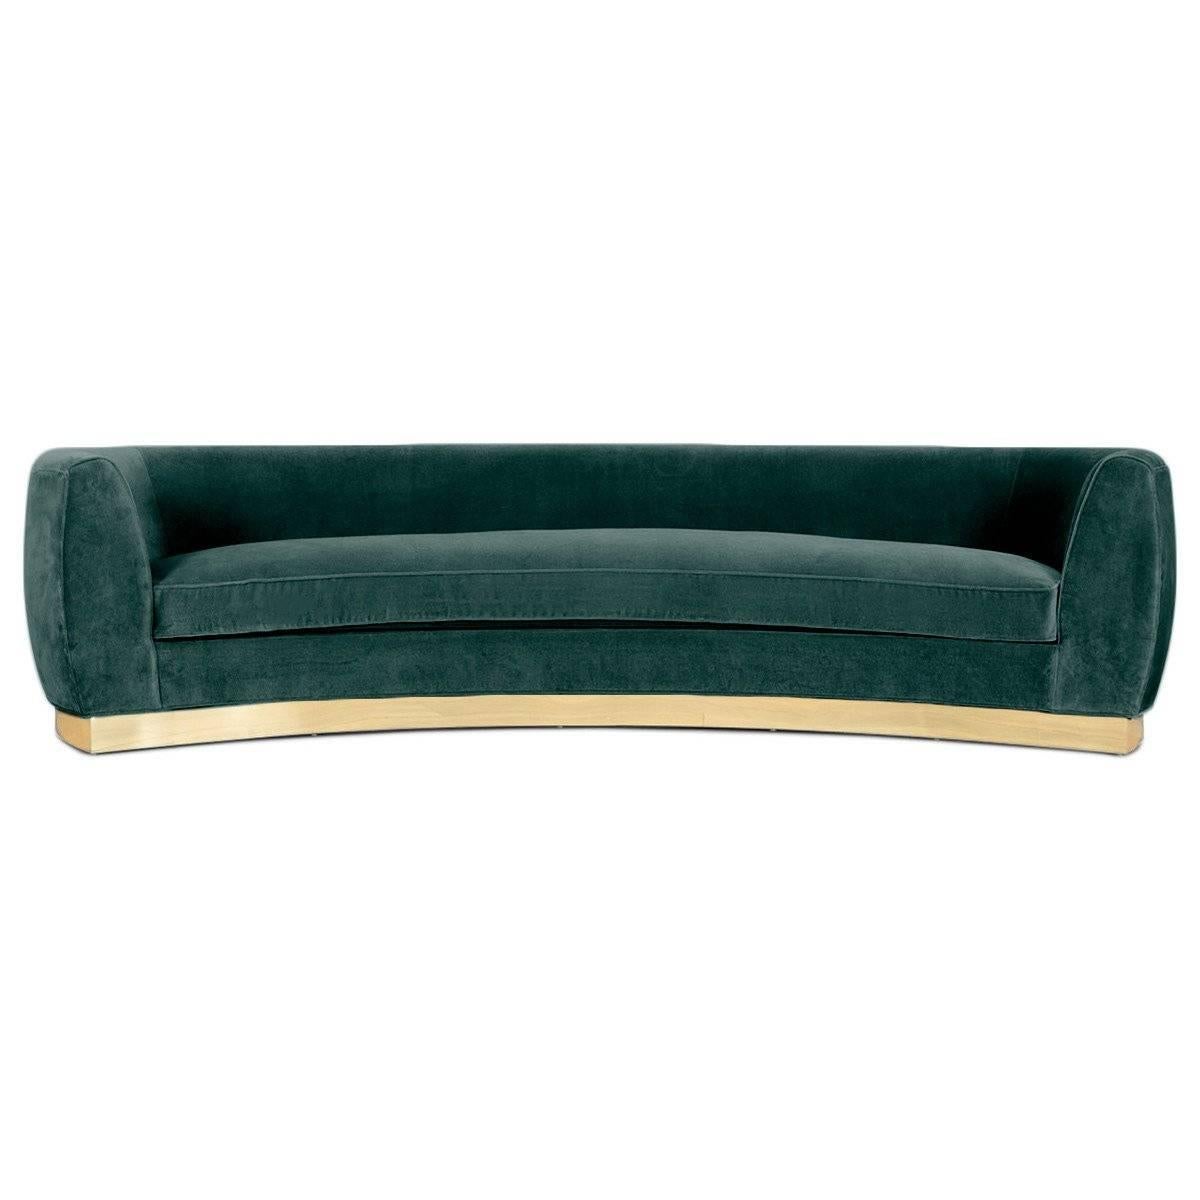 Art Deco Style Curved Sofa in Velvet Upholstery with Brass Toe-kick Base 10 foot For Sale 7